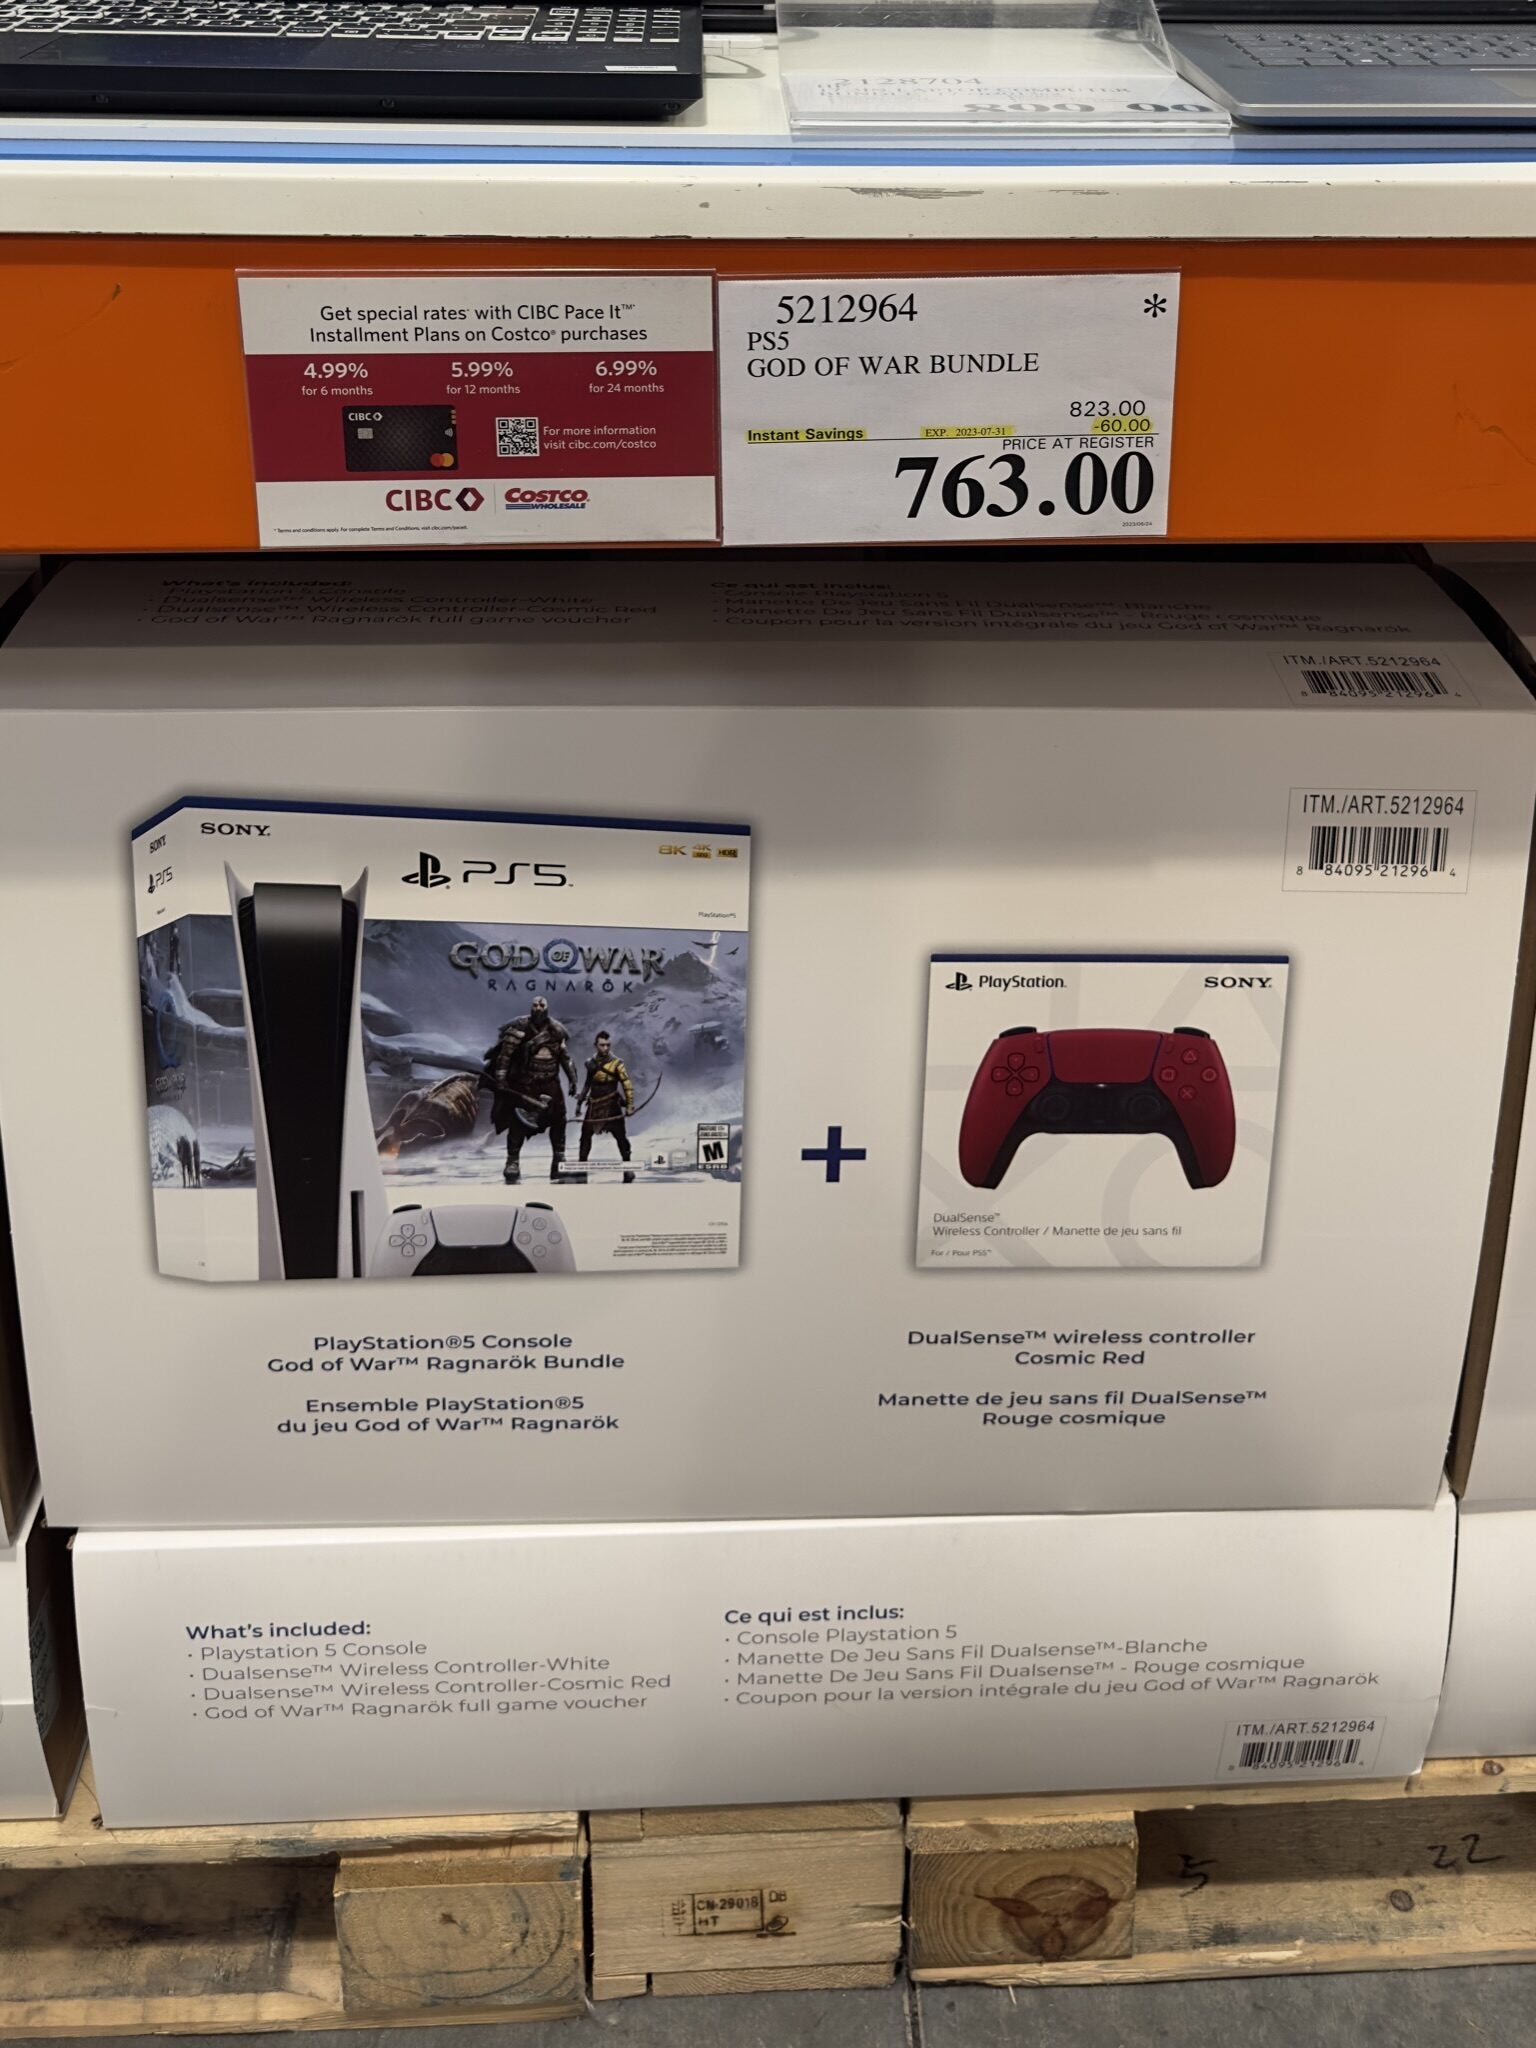 Costco members can buy a PlayStation 5 bundle right now (update: sold out)  - The Verge